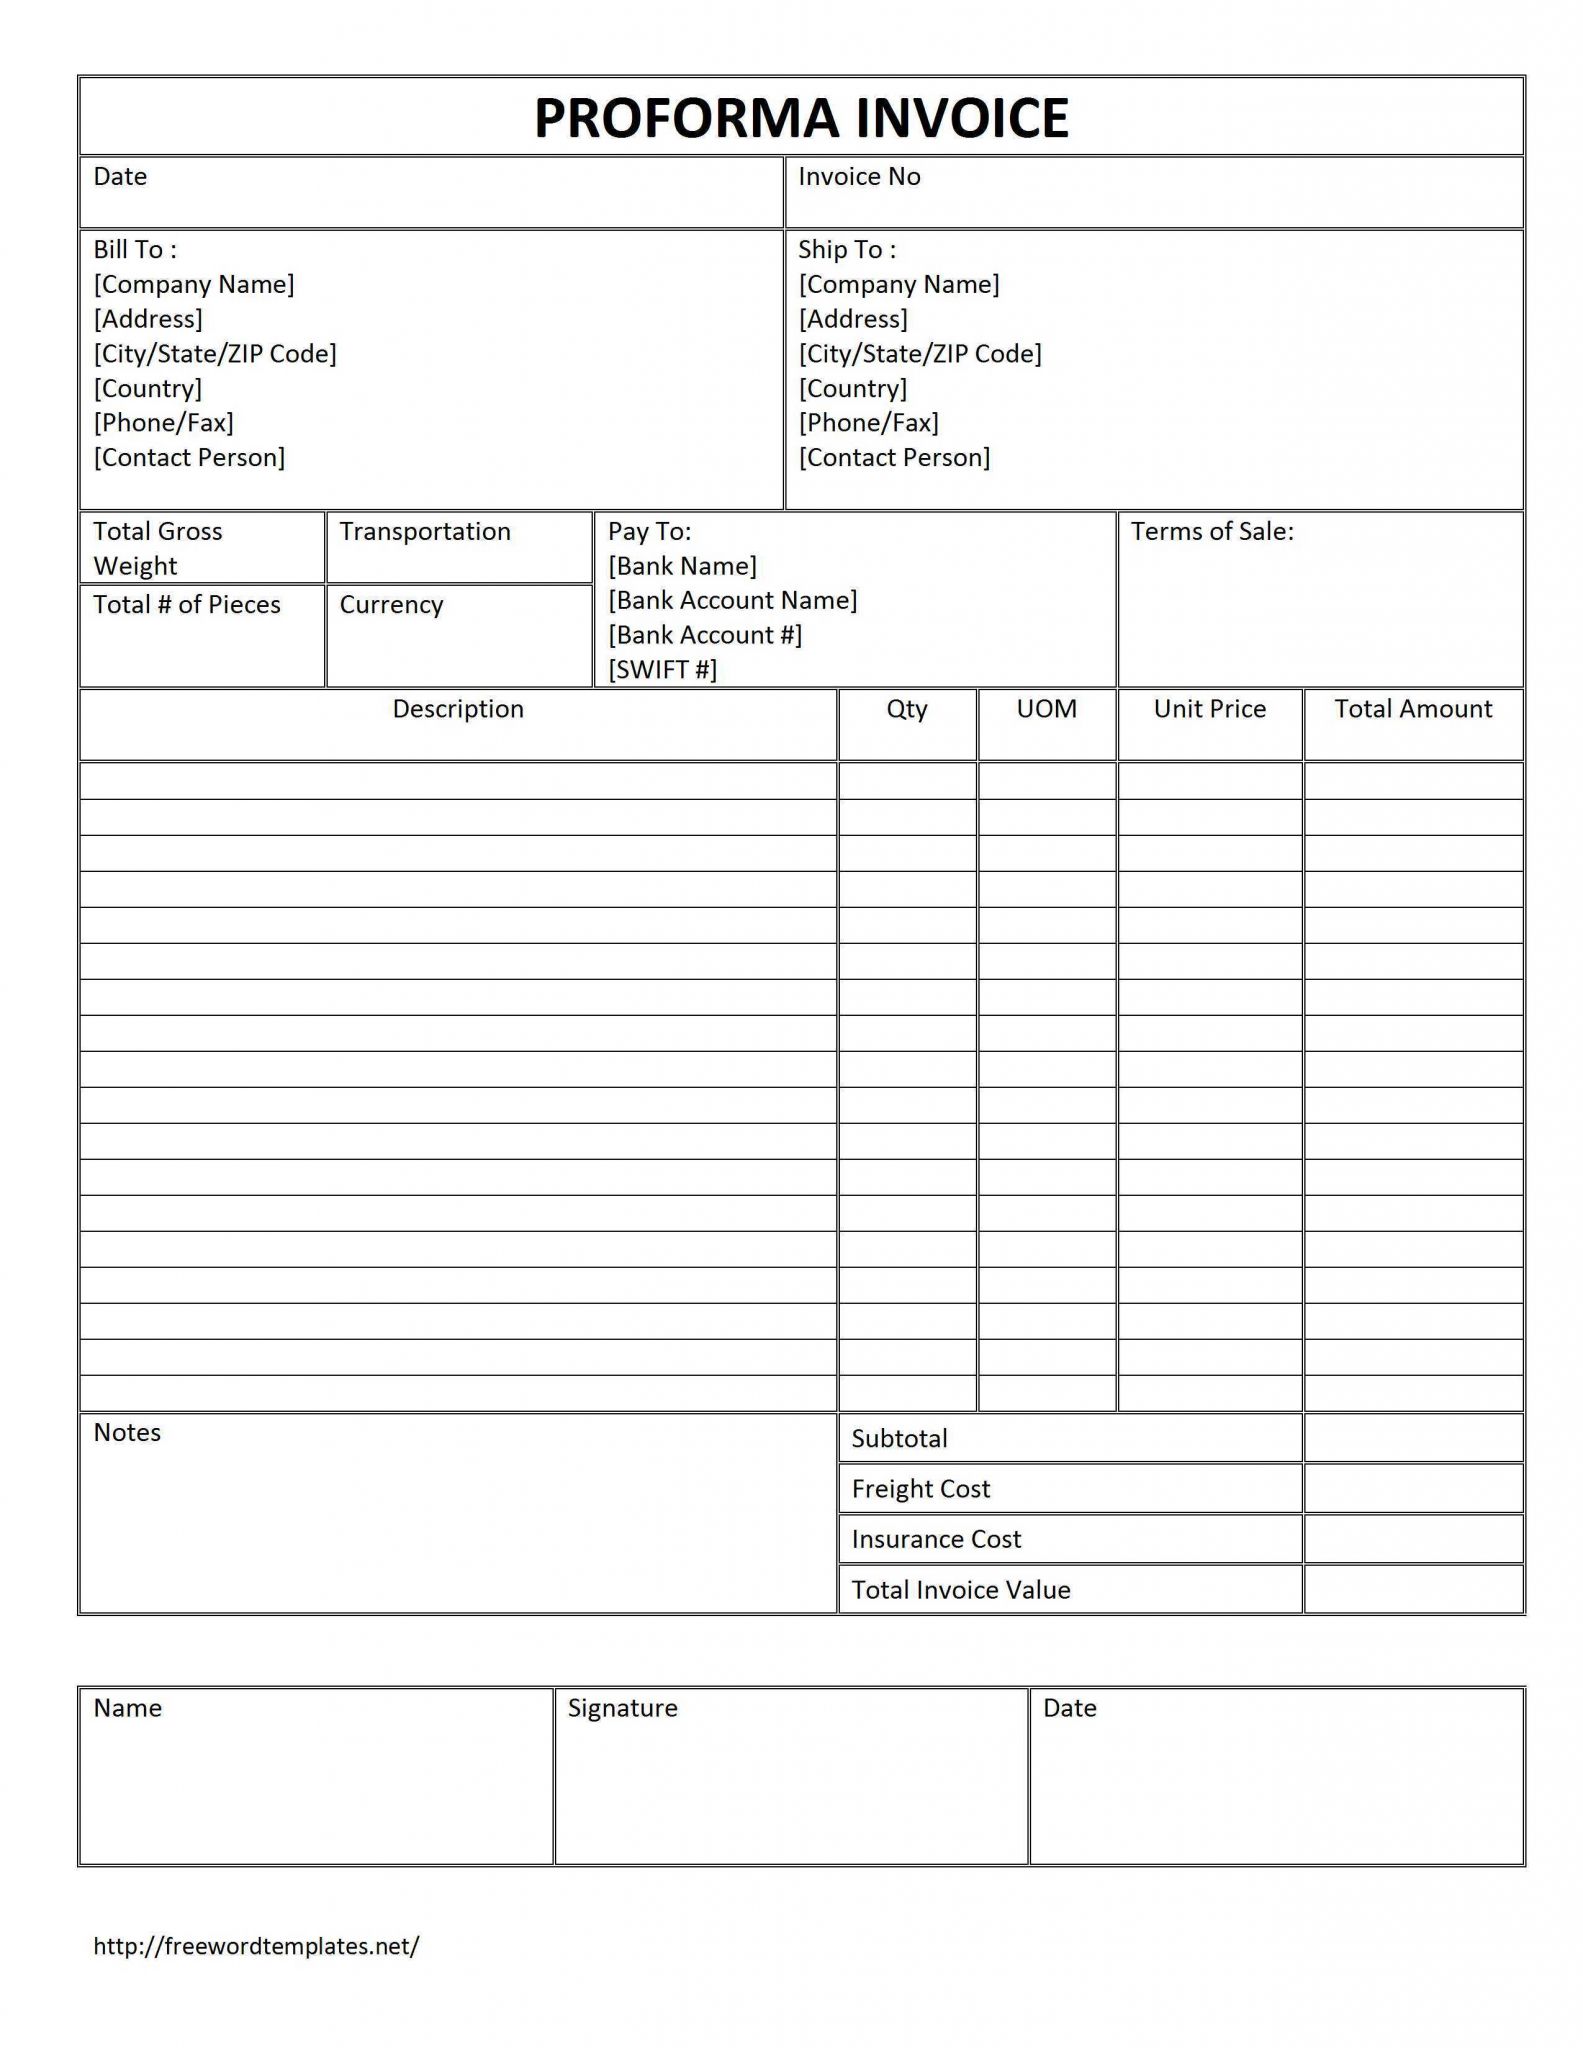 Managing A Checking Account Worksheet Answers Along with Excel Spreadsheet Inventory Management Free Proforma Invoice